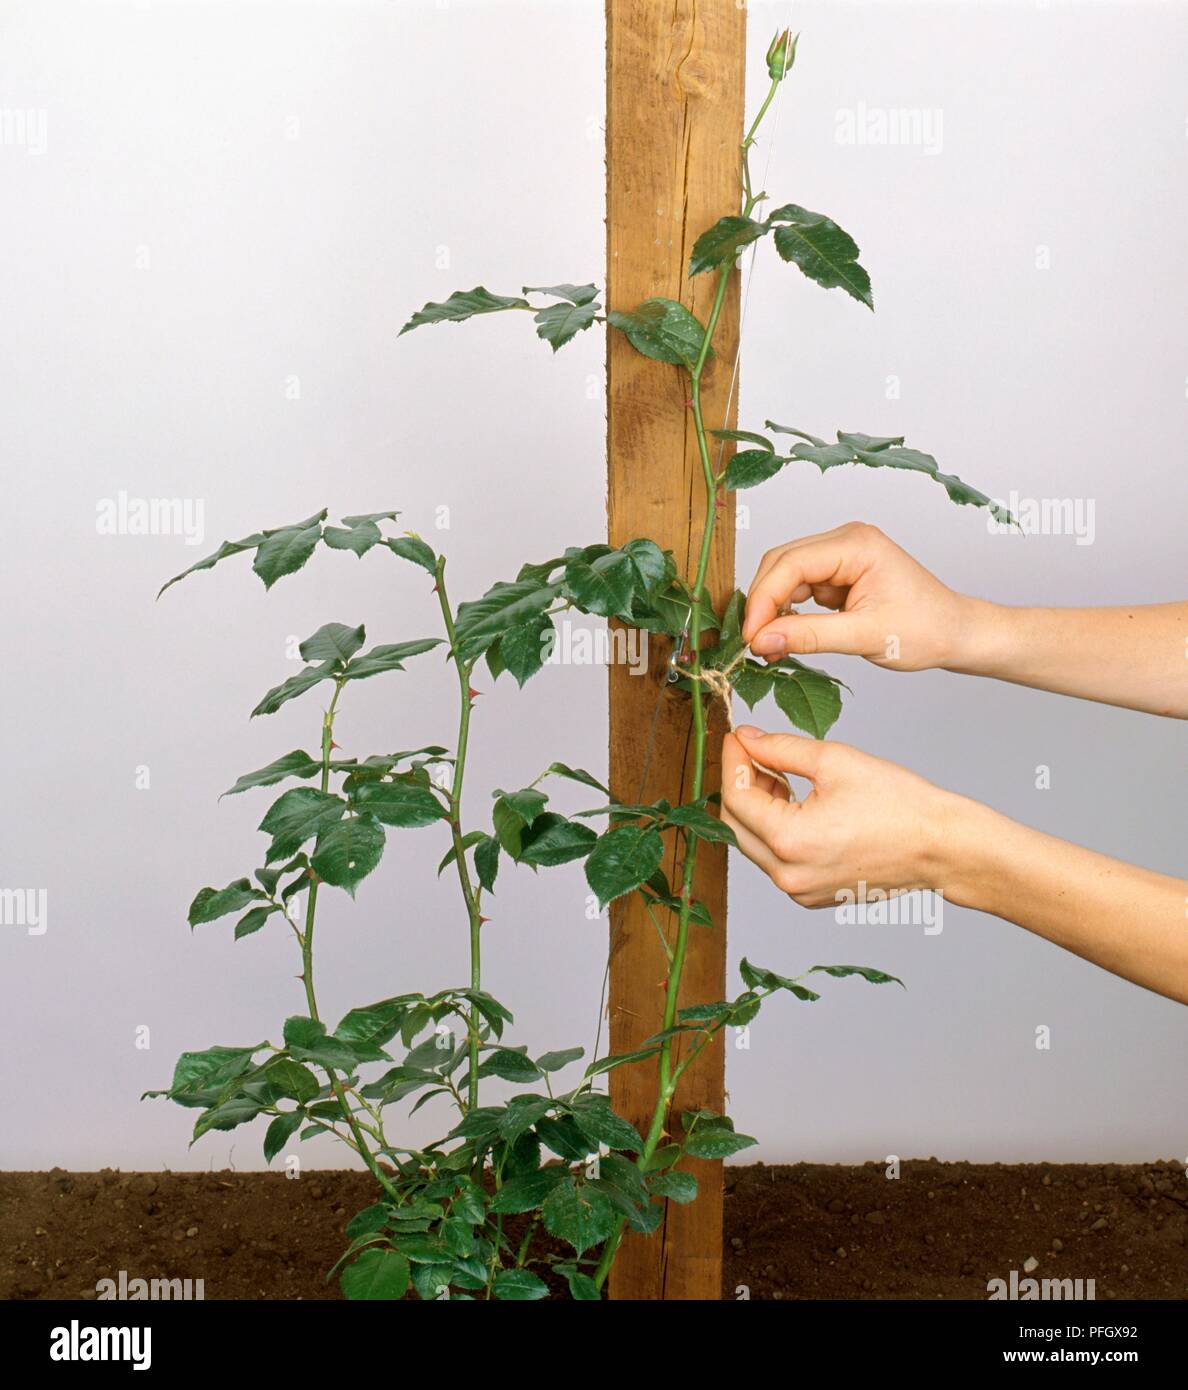 Tying long stem of plant to wooden post Stock Photo